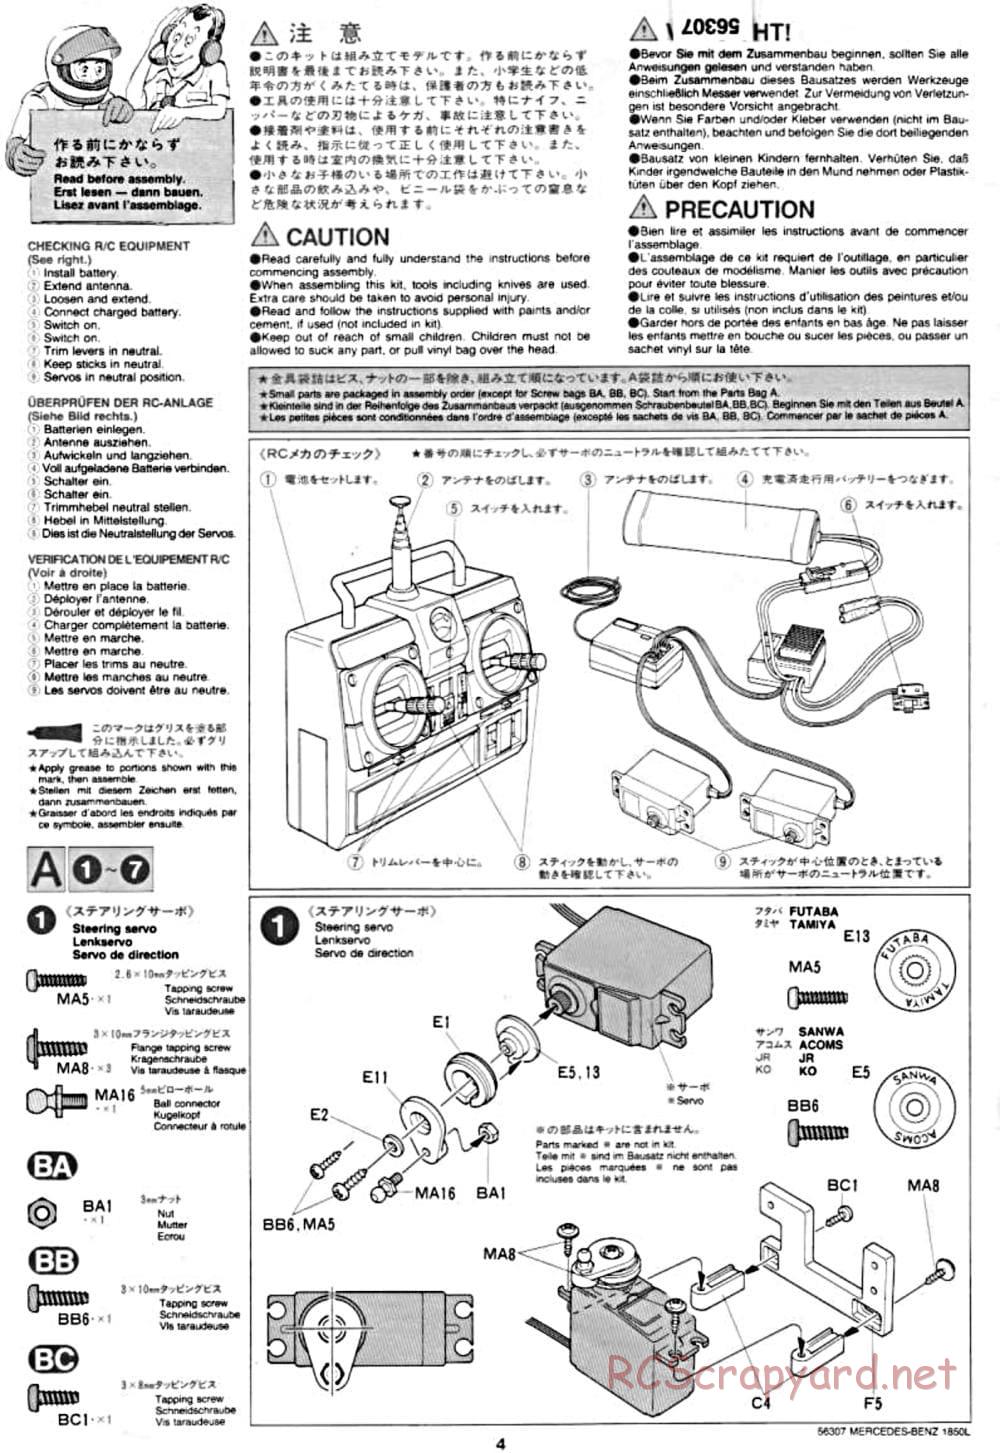 Tamiya - Mercedes-Benz 1850L Delivery Truck - Manual - Page 4